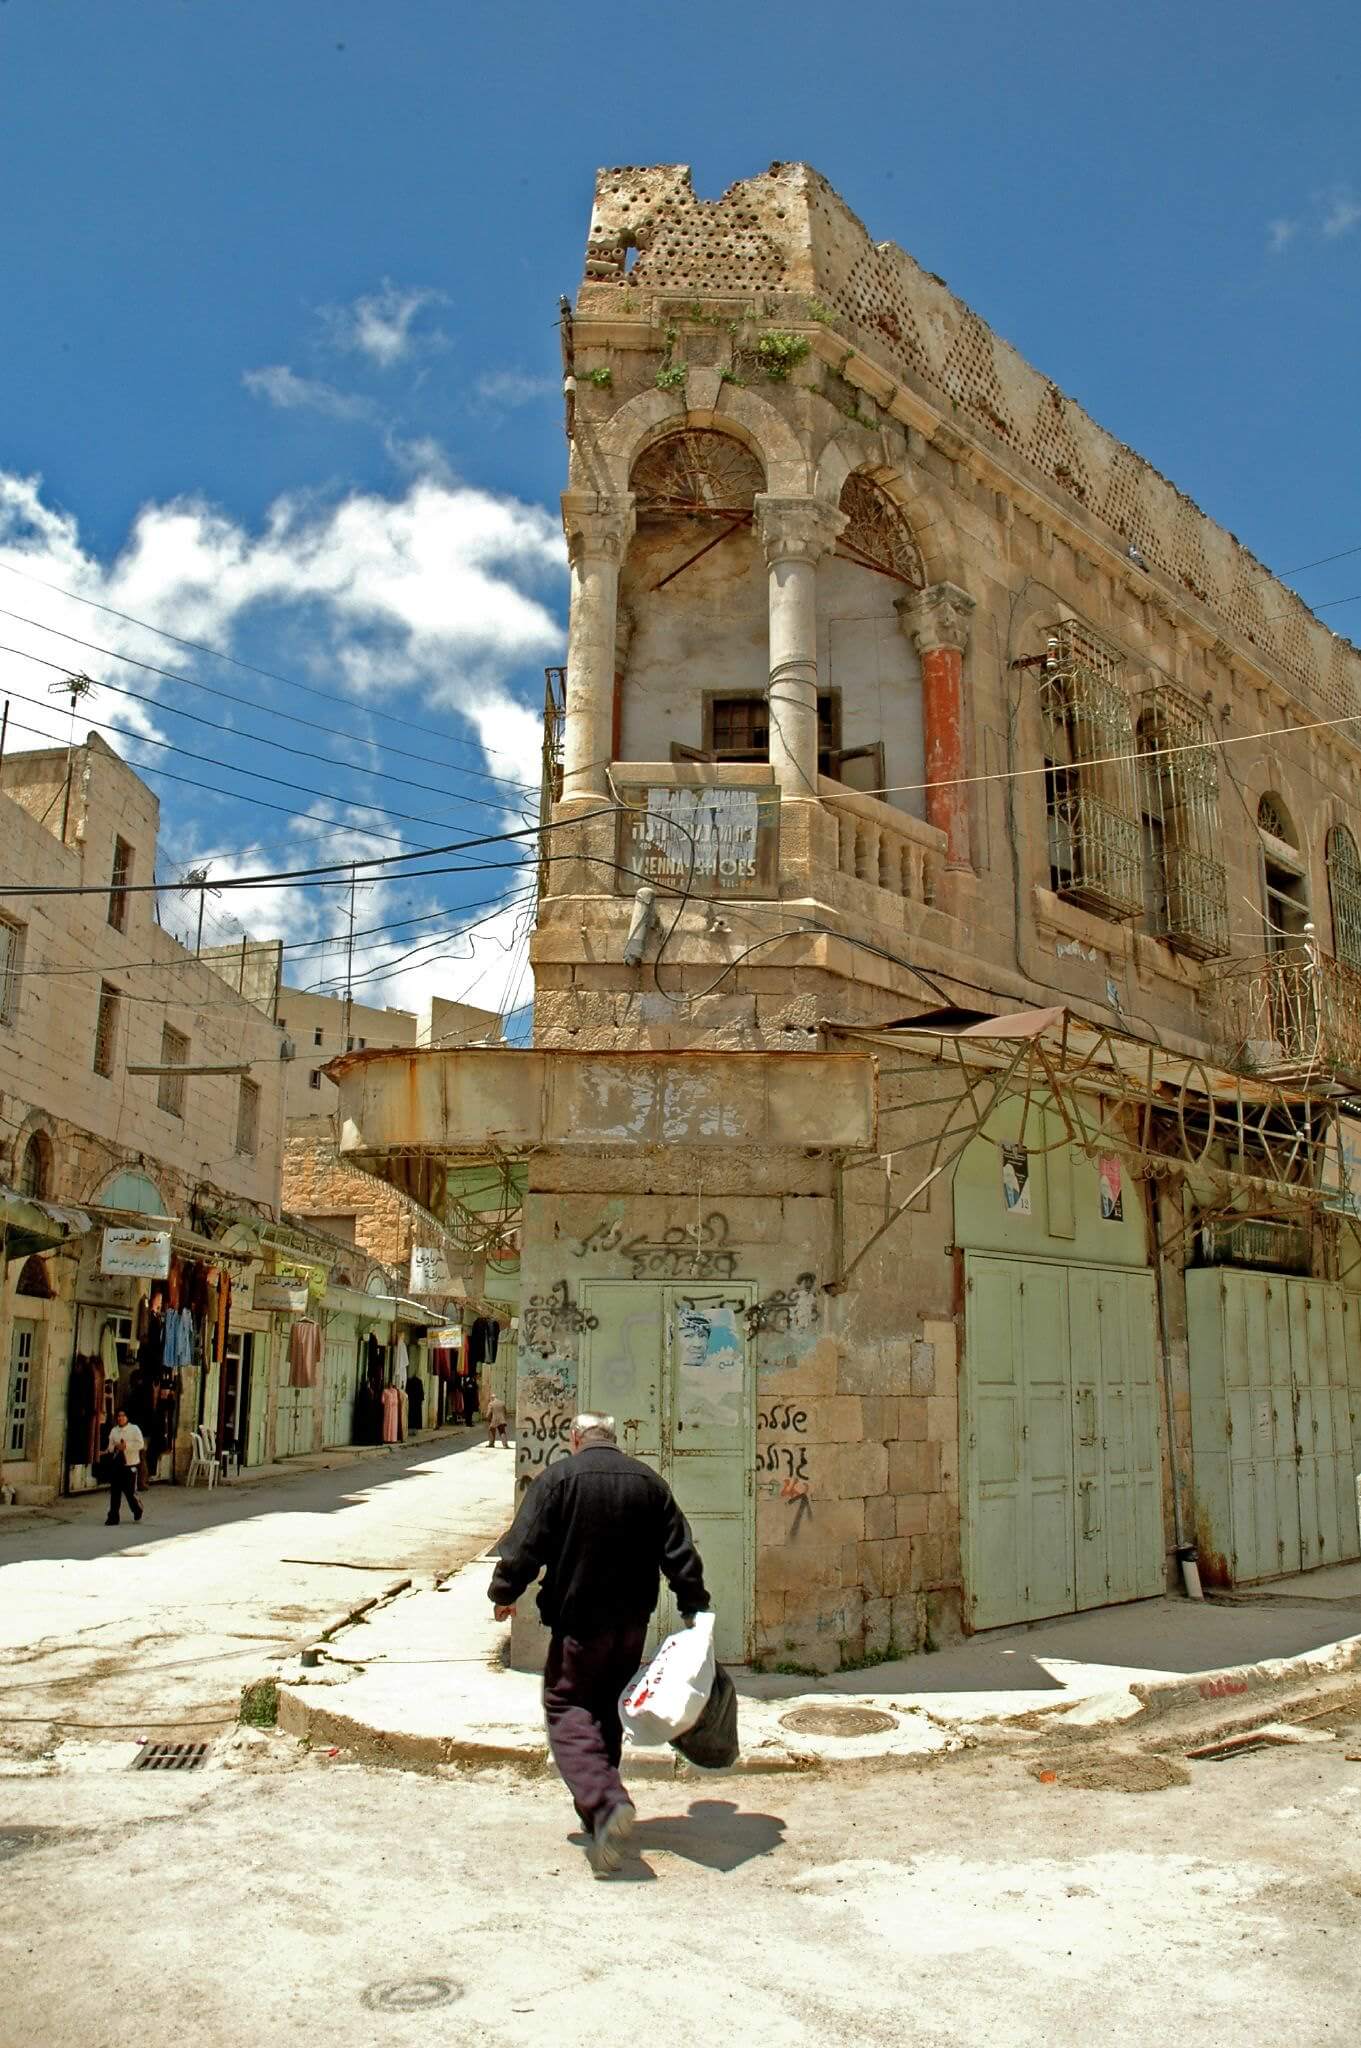 A local man walking down a rubble-filled street in downtown Hebron